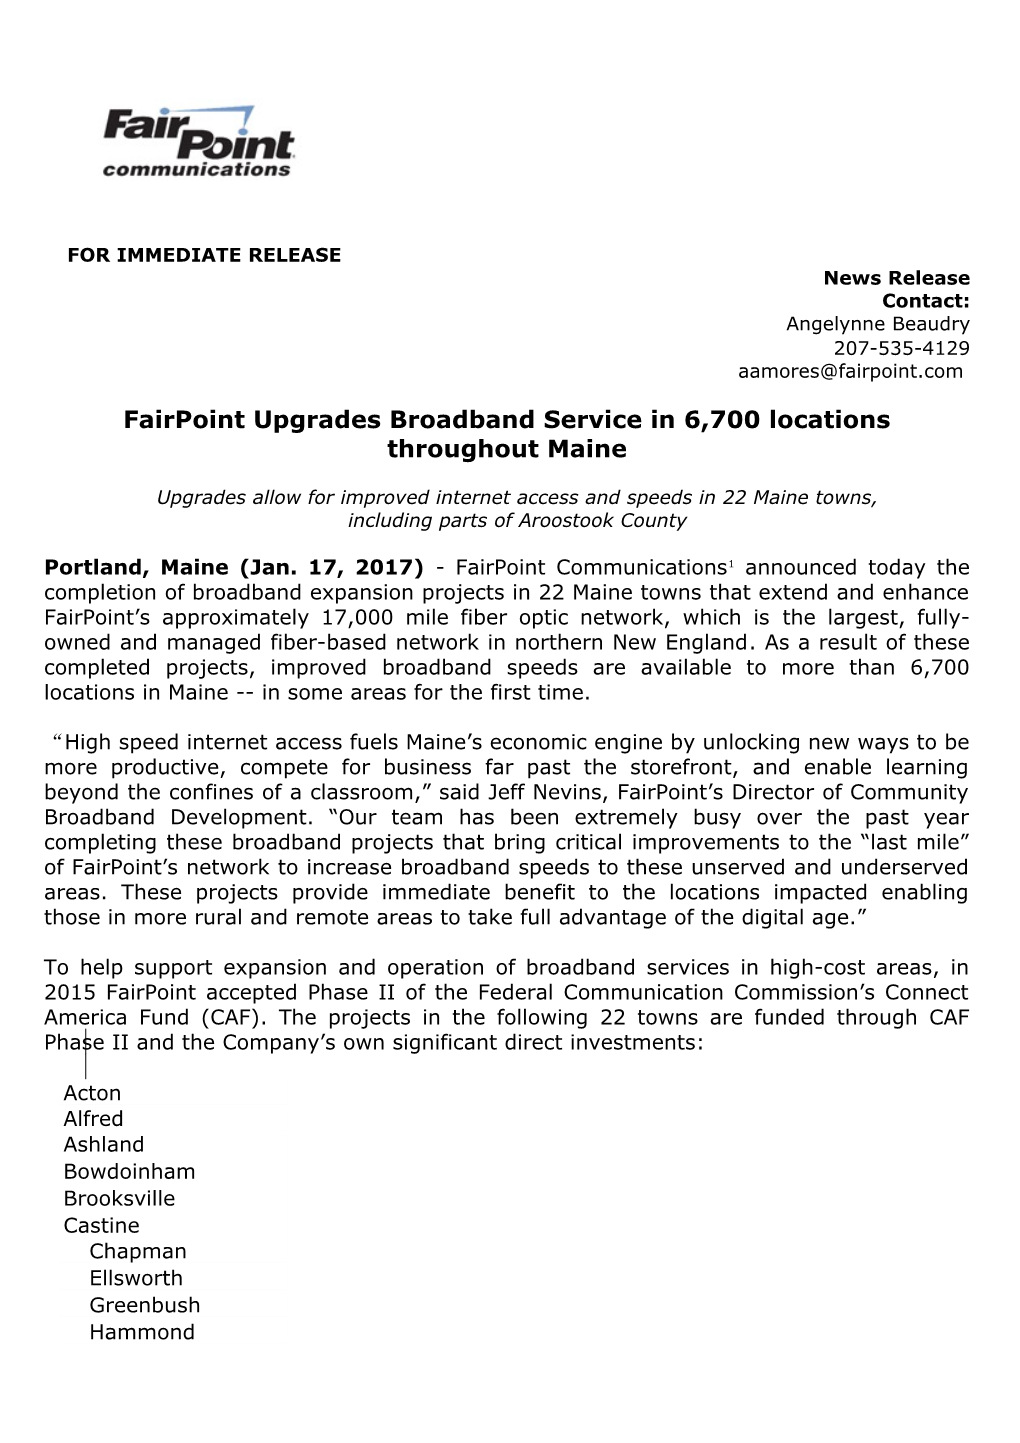 Fairpoint Upgrades Broadband Service in 6,700 Locations Throughout Maine